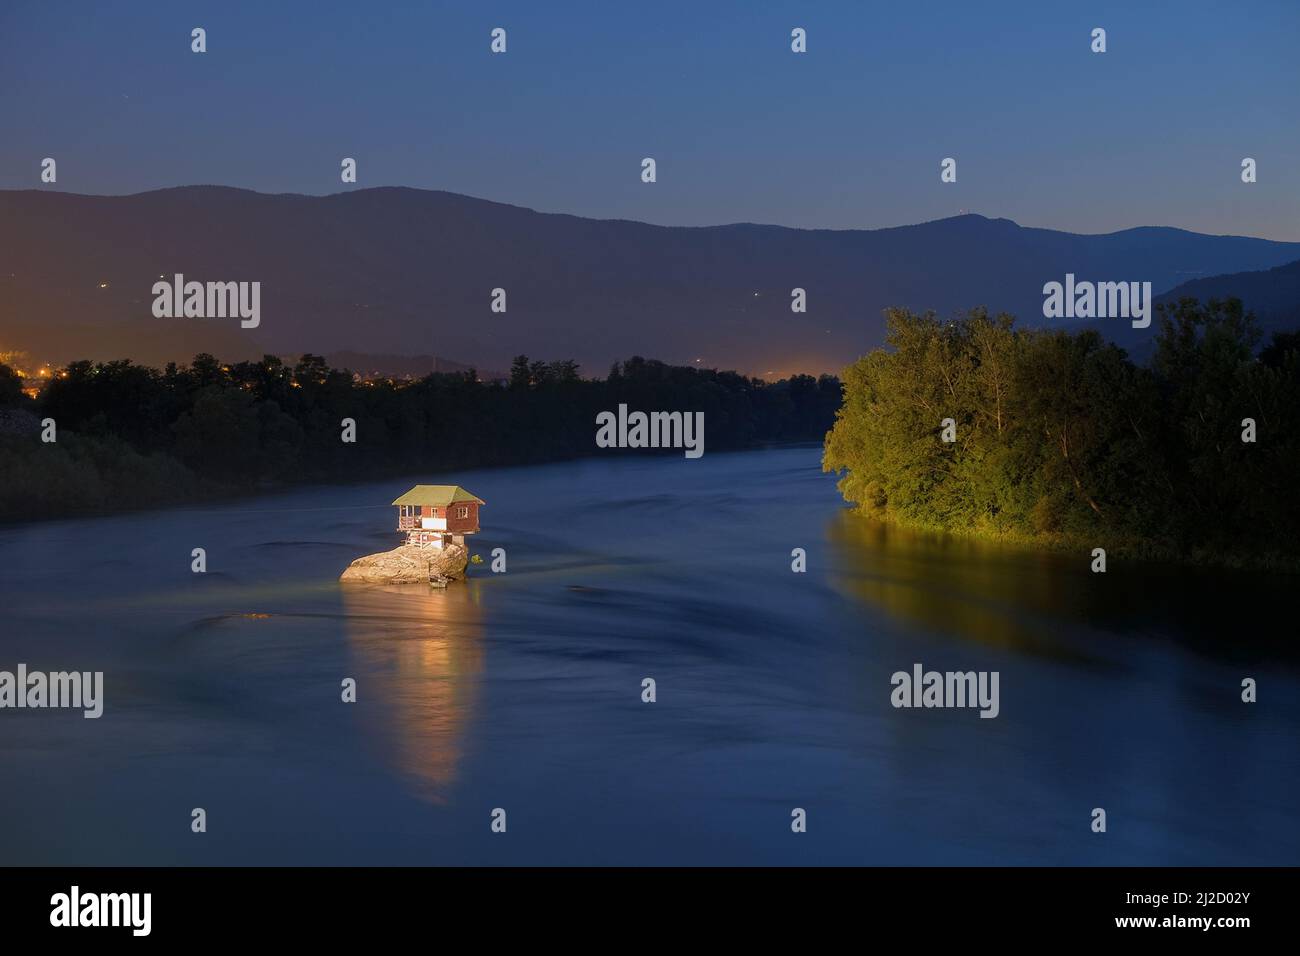 wooden house on a rock of Drina River by night, Serbia Stock Photo